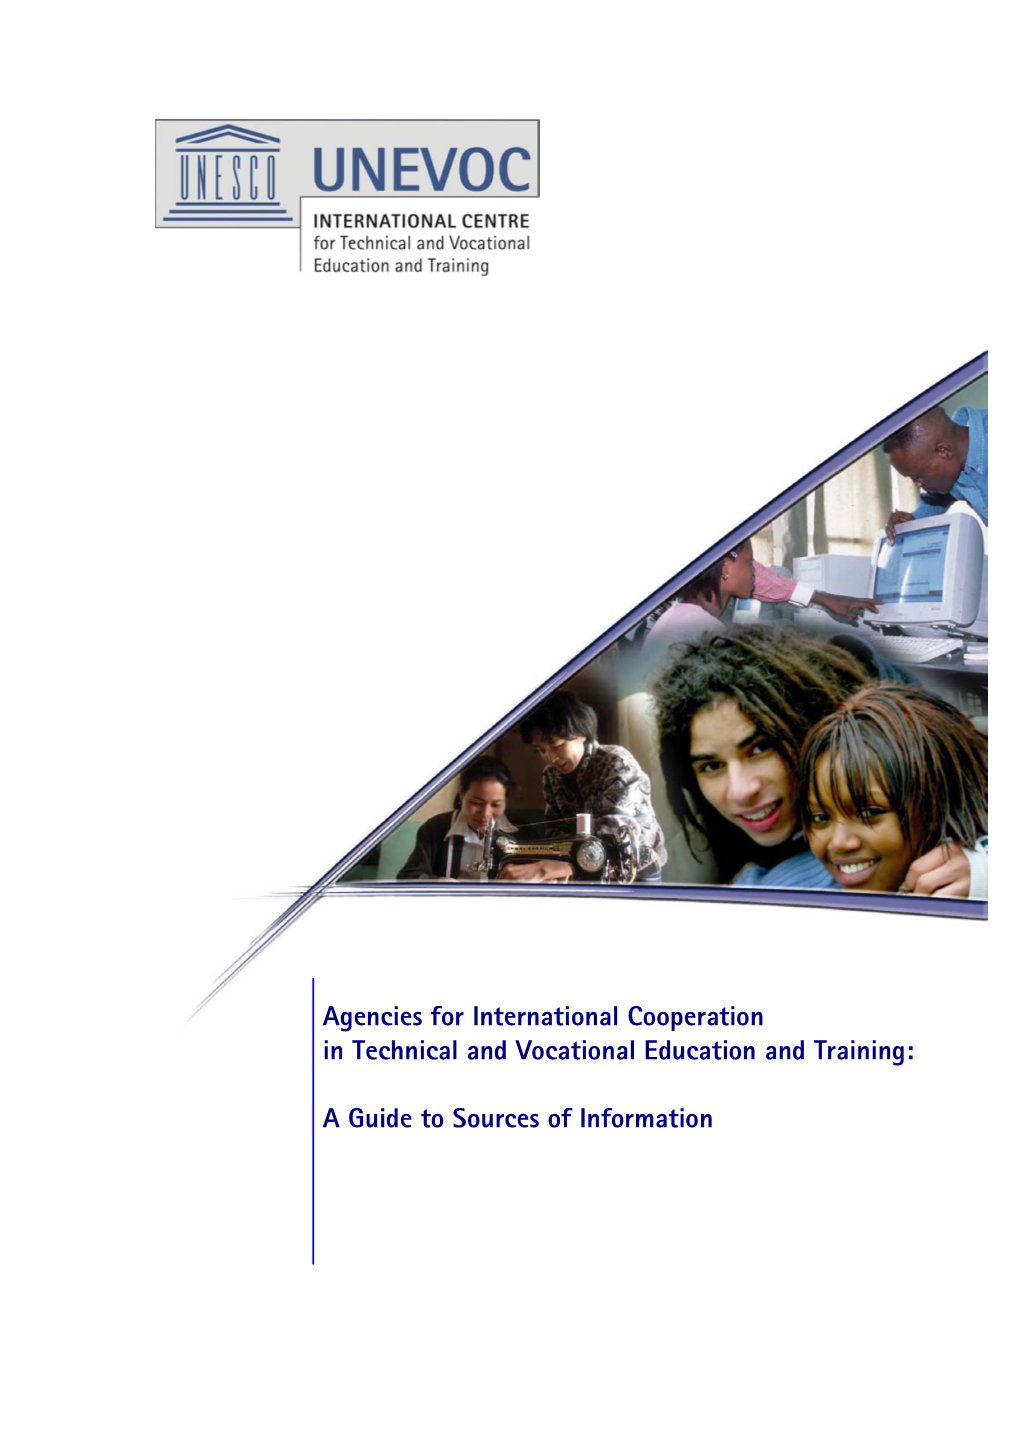 Agencies for International Cooperation in Technical and Vocational Education and Training